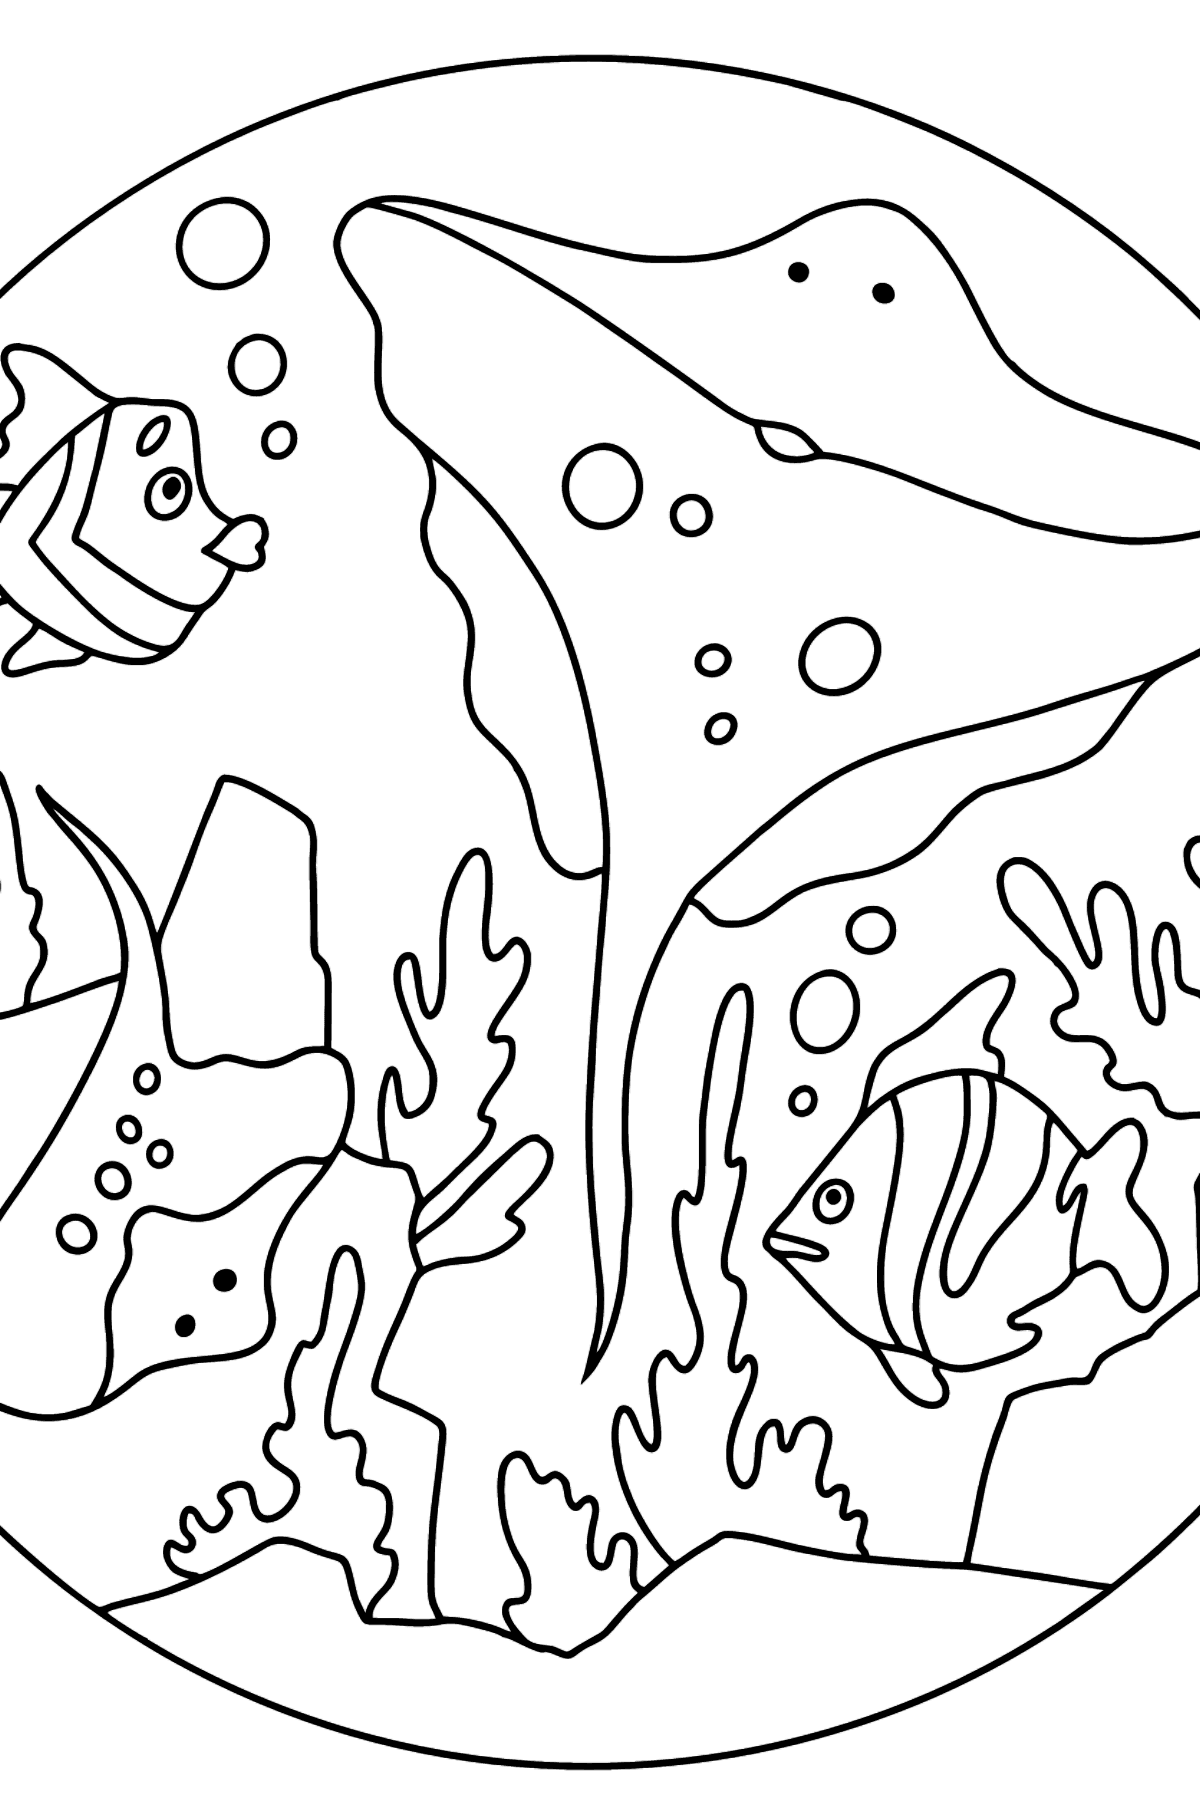 Coloring Page - Fish are Playing with a Charming Stingray - Coloring Pages for Kids